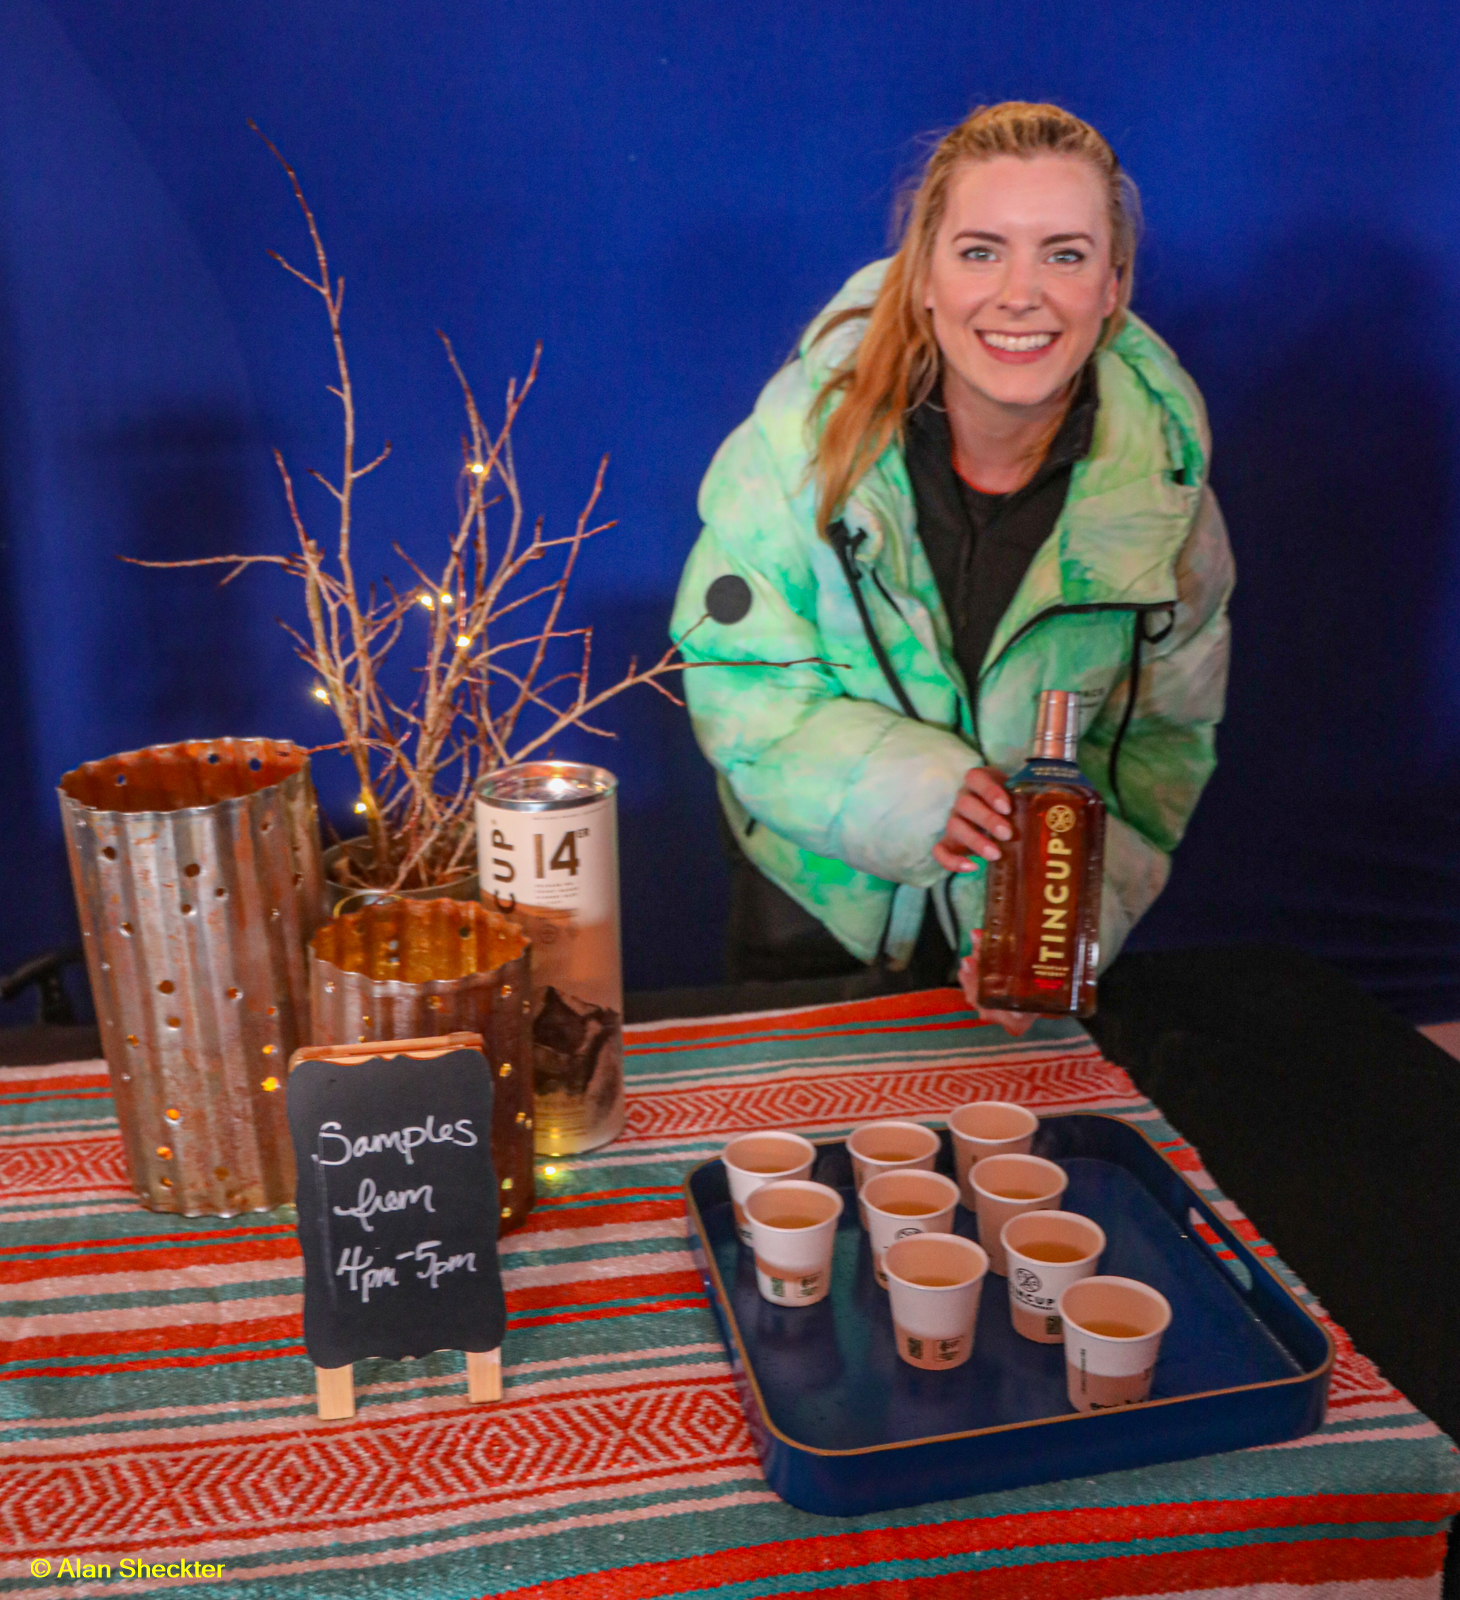 Tincup whiskey samples in the VIP tent